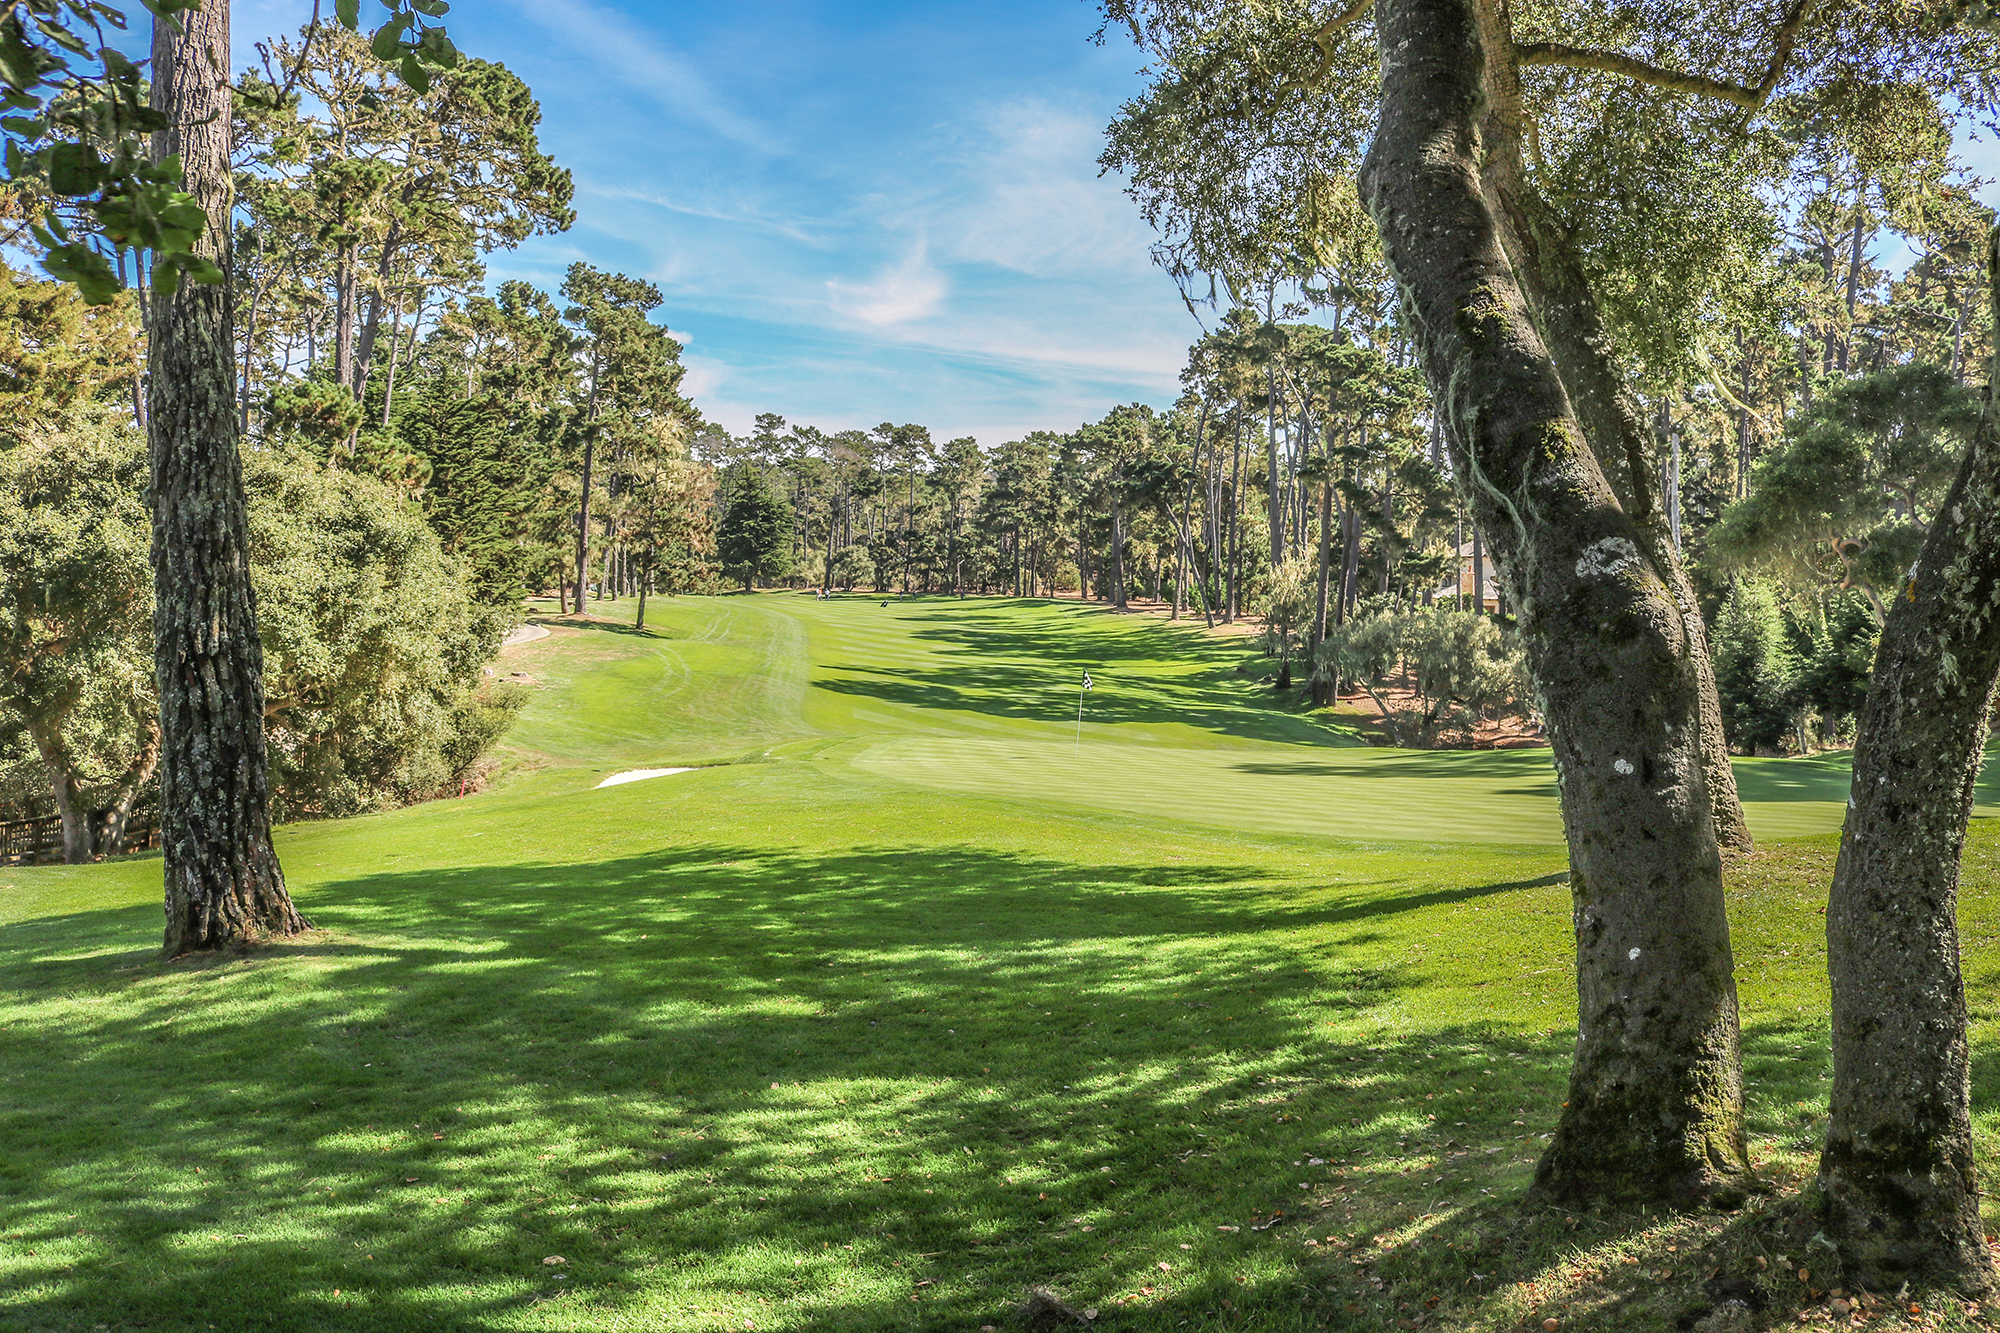 View from behind the 16th green at spyglass hill with tree trunks in foreground